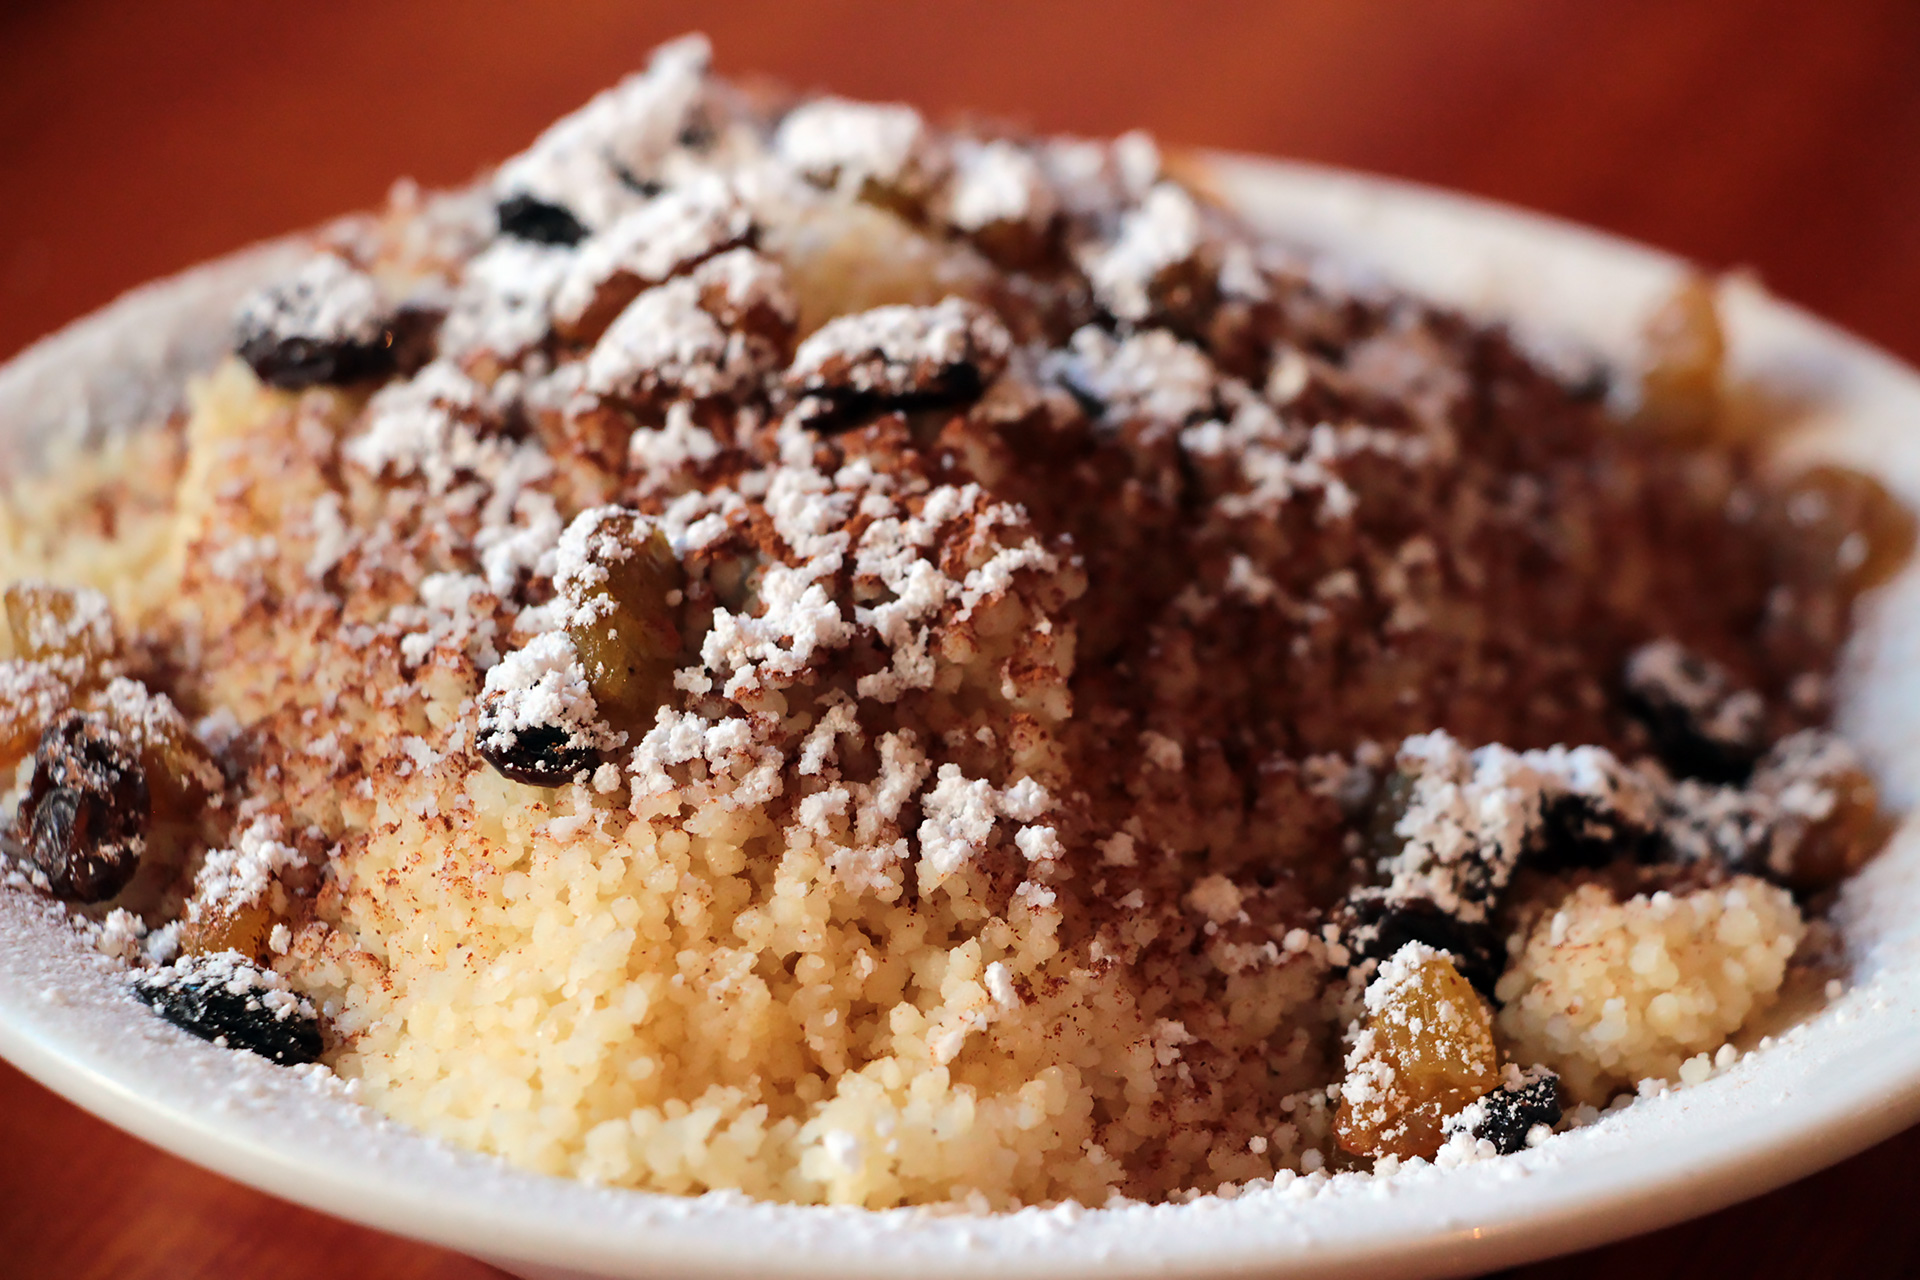 Cinnamon and sugar dusted couscous with regular and golden raisins.